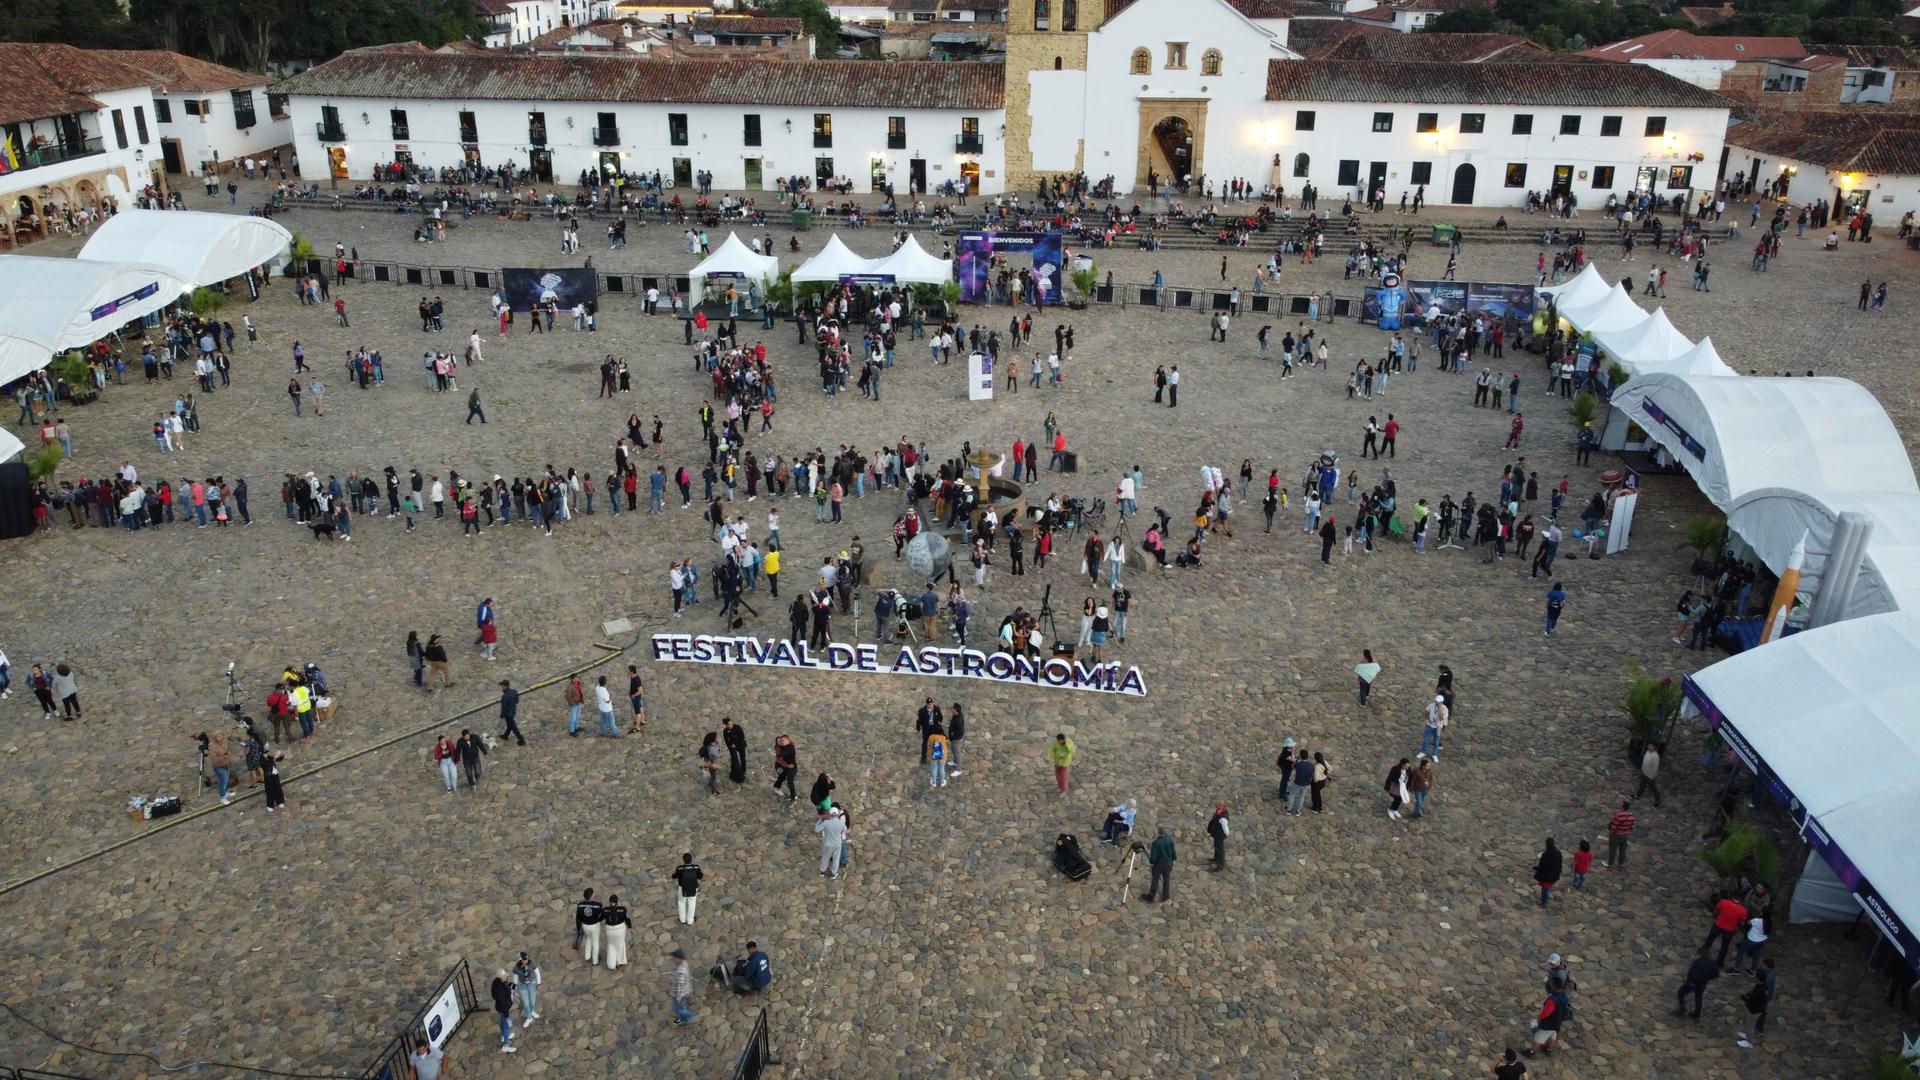 Every year, about 5,000 people attend Villa de Leyva's Astronomy Festival, which is held in the town's colonial-era square.